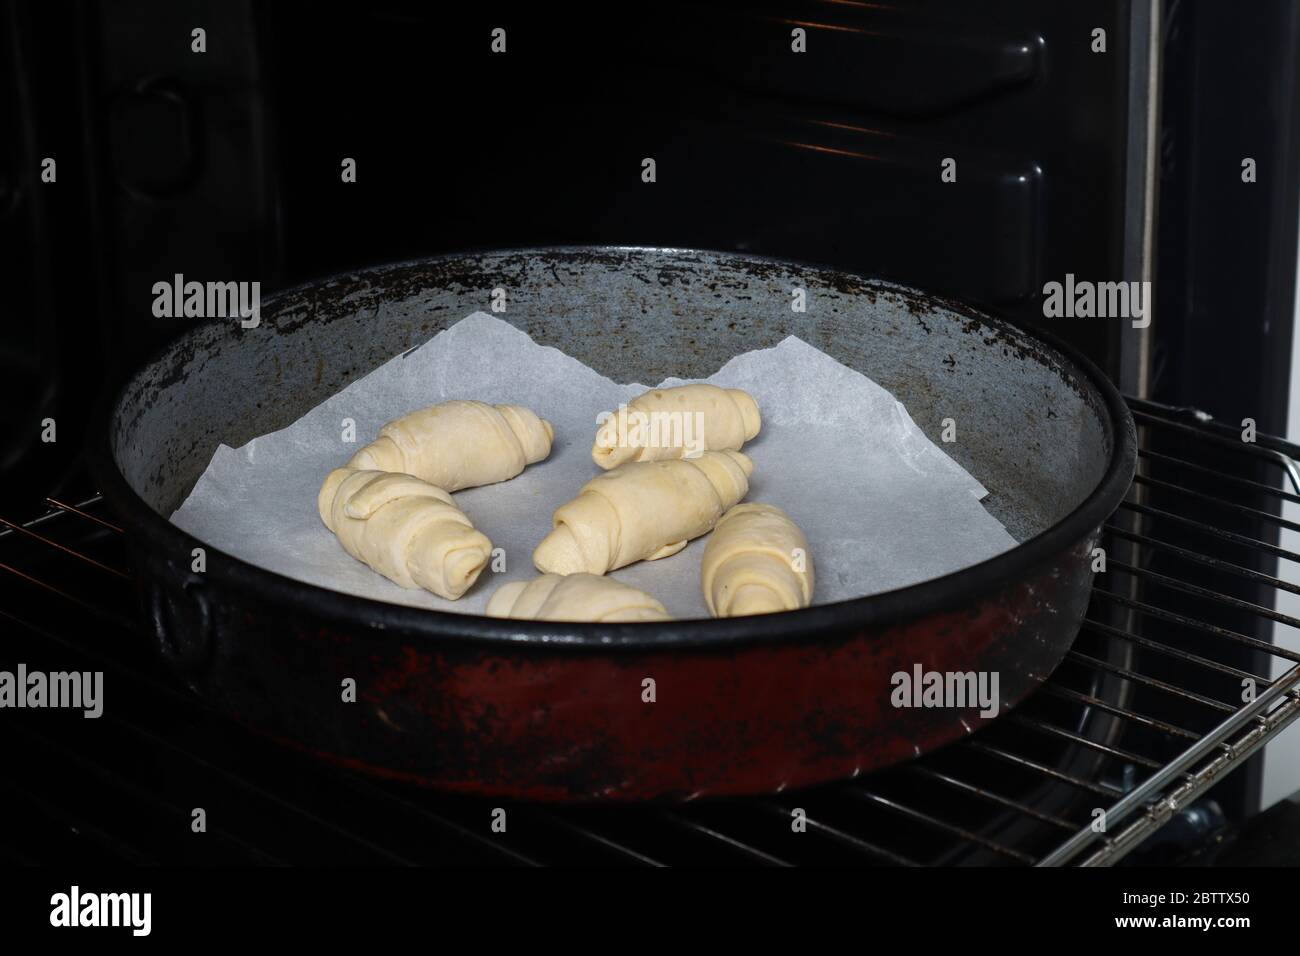 Unbaked rolls in a casserole and ready for backing in the oven. The process of preparing homemade rolls pastry. Domestic and hand made food Stock Photo